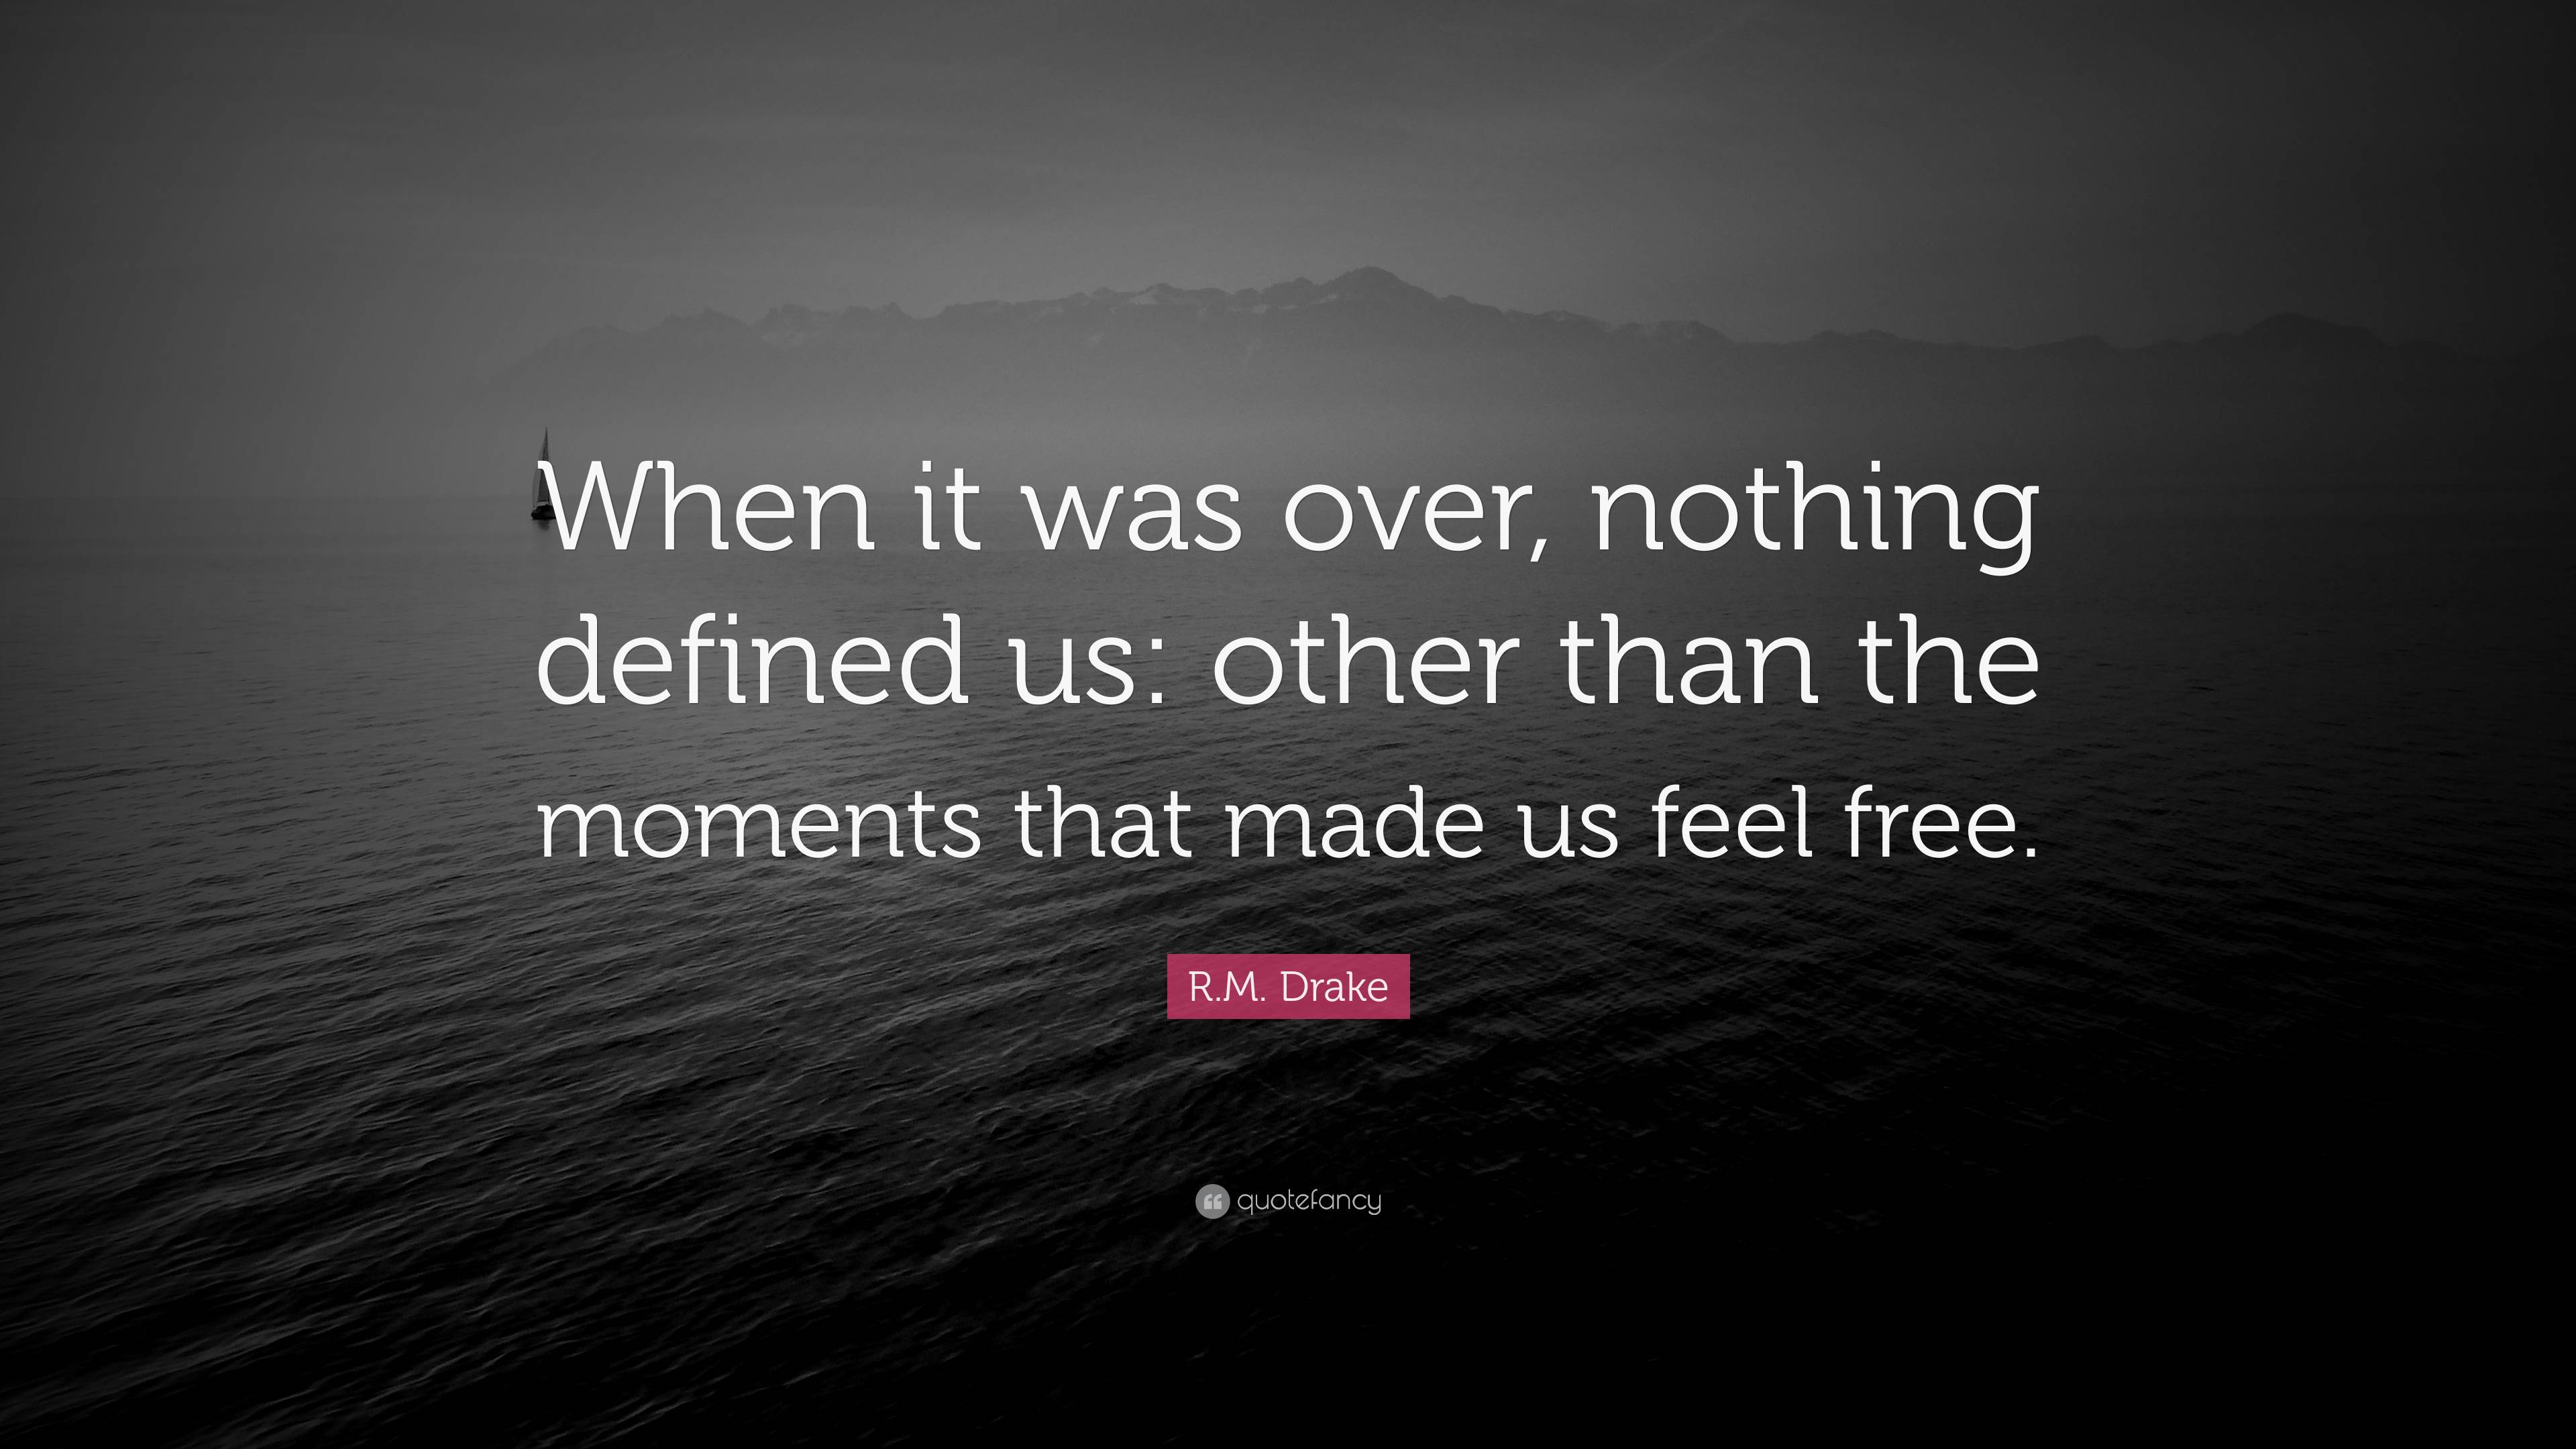 R.M. Drake Quote: “When it was over, nothing defined us: other than the ...